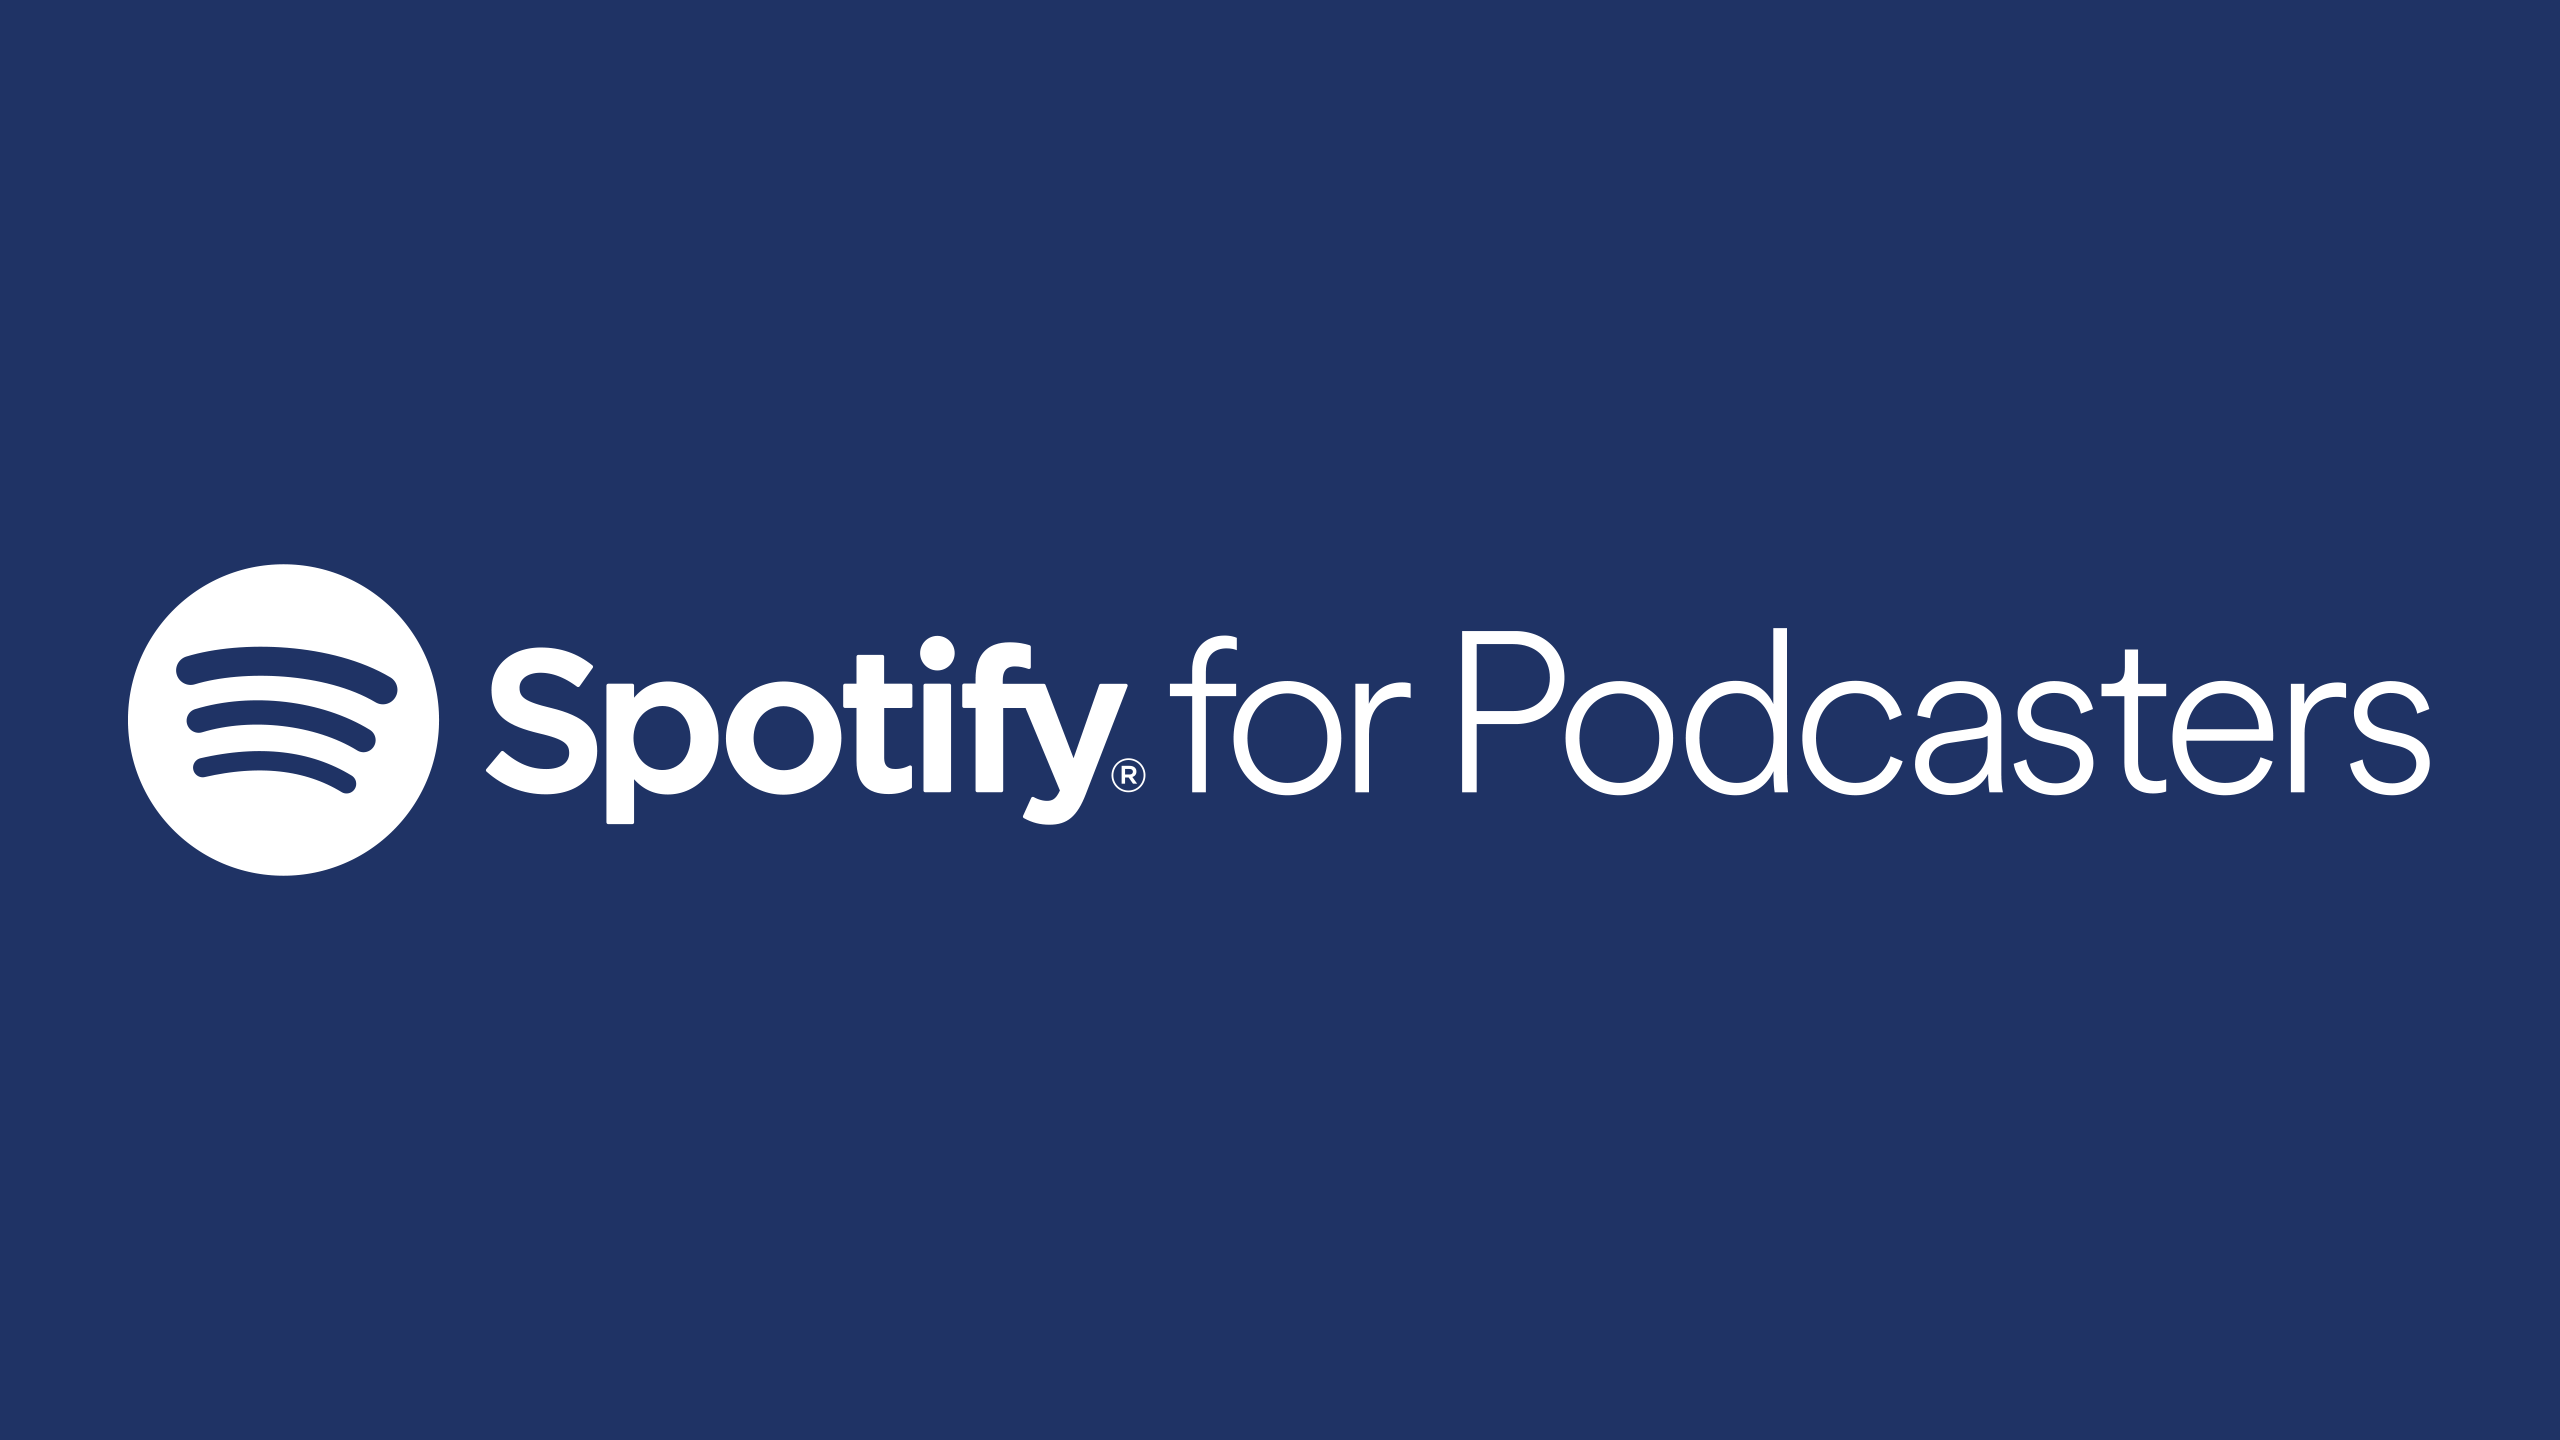 Spotify claim to be “the #1 podcast platform U.S. listeners use the most”